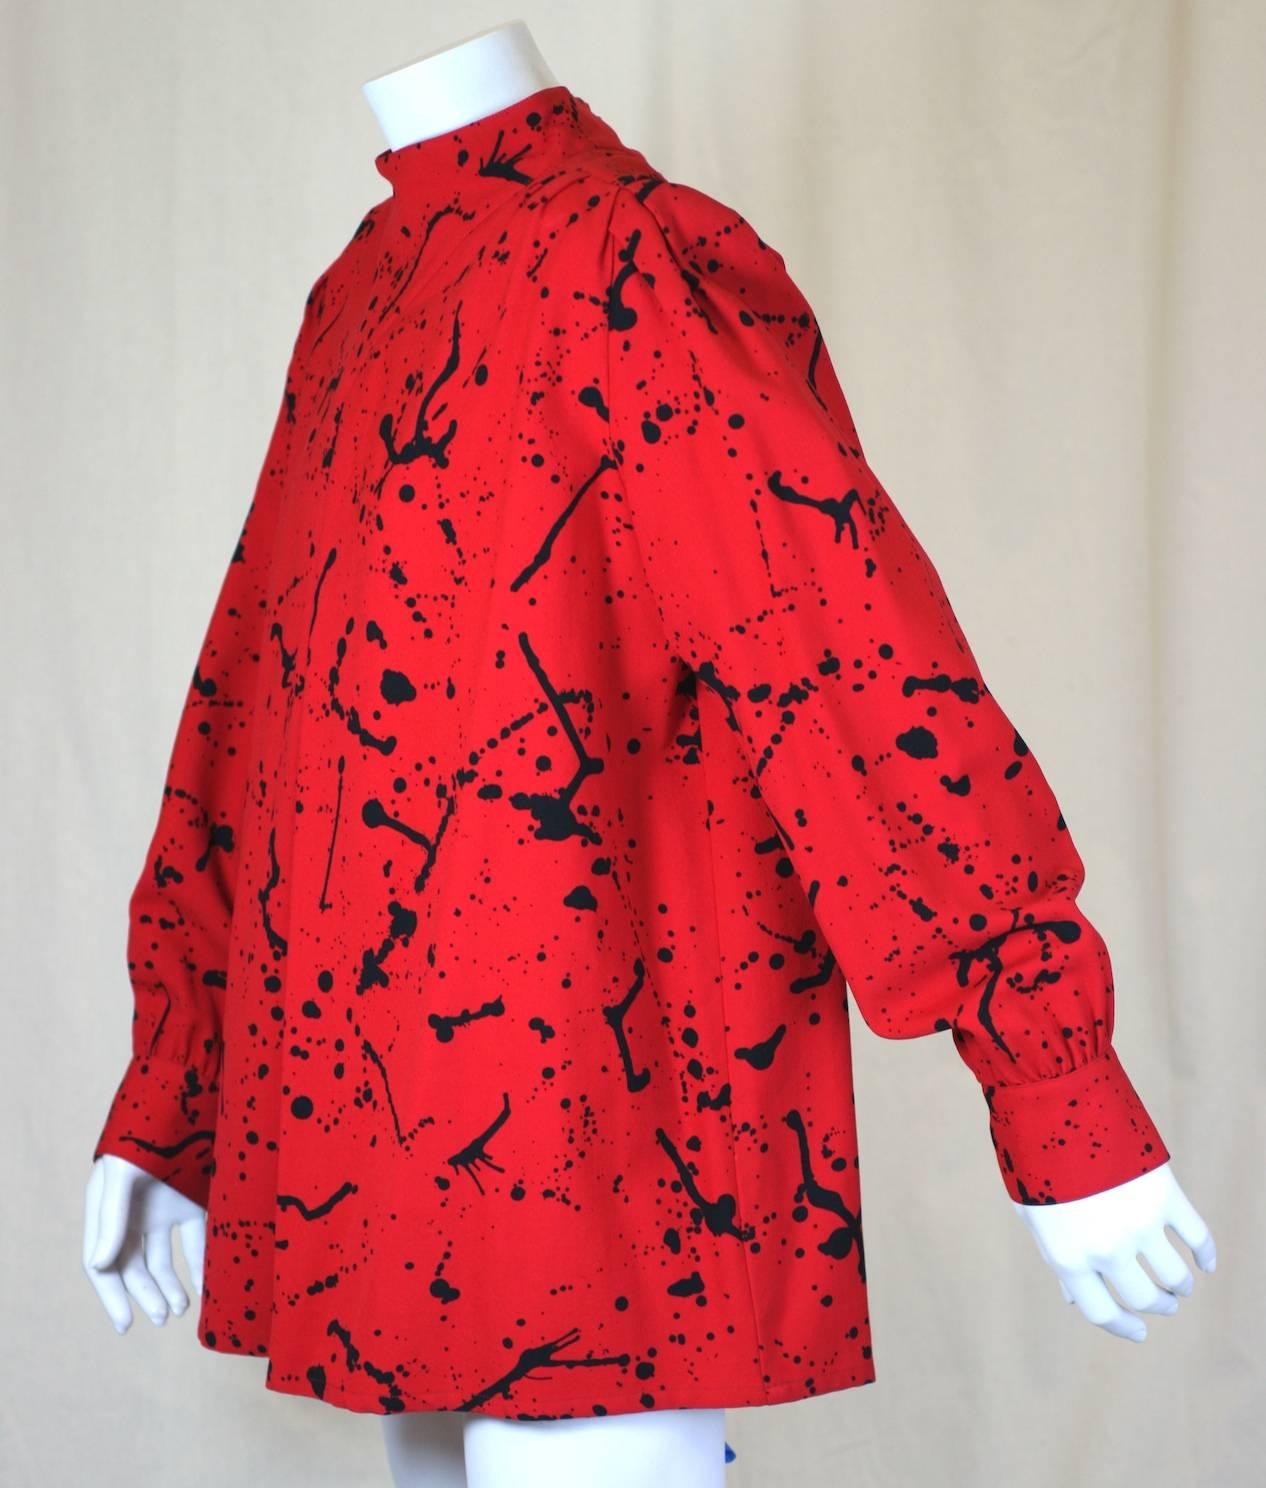 Andre Courreges Splatter Print shirt in lightweight wool twill. Open neck yoke comes to a 